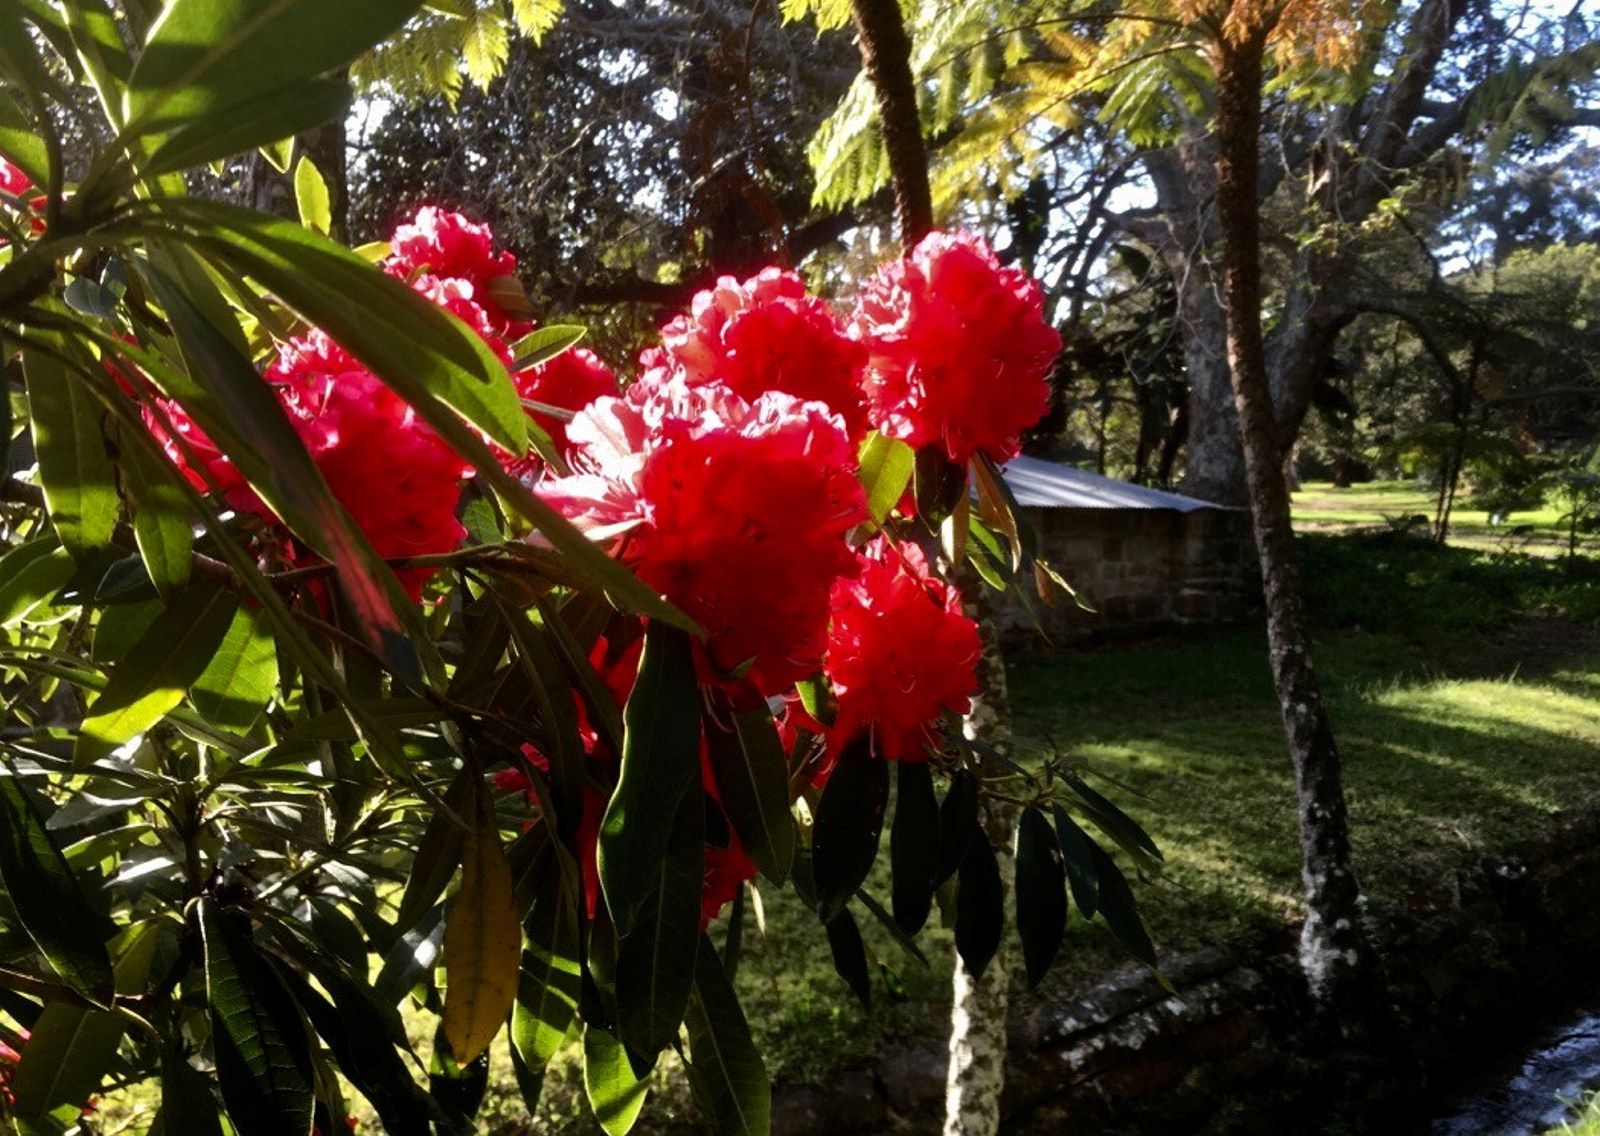 Vaucluse House Rhododendron with its red/pink flowers is a spectacle to see.